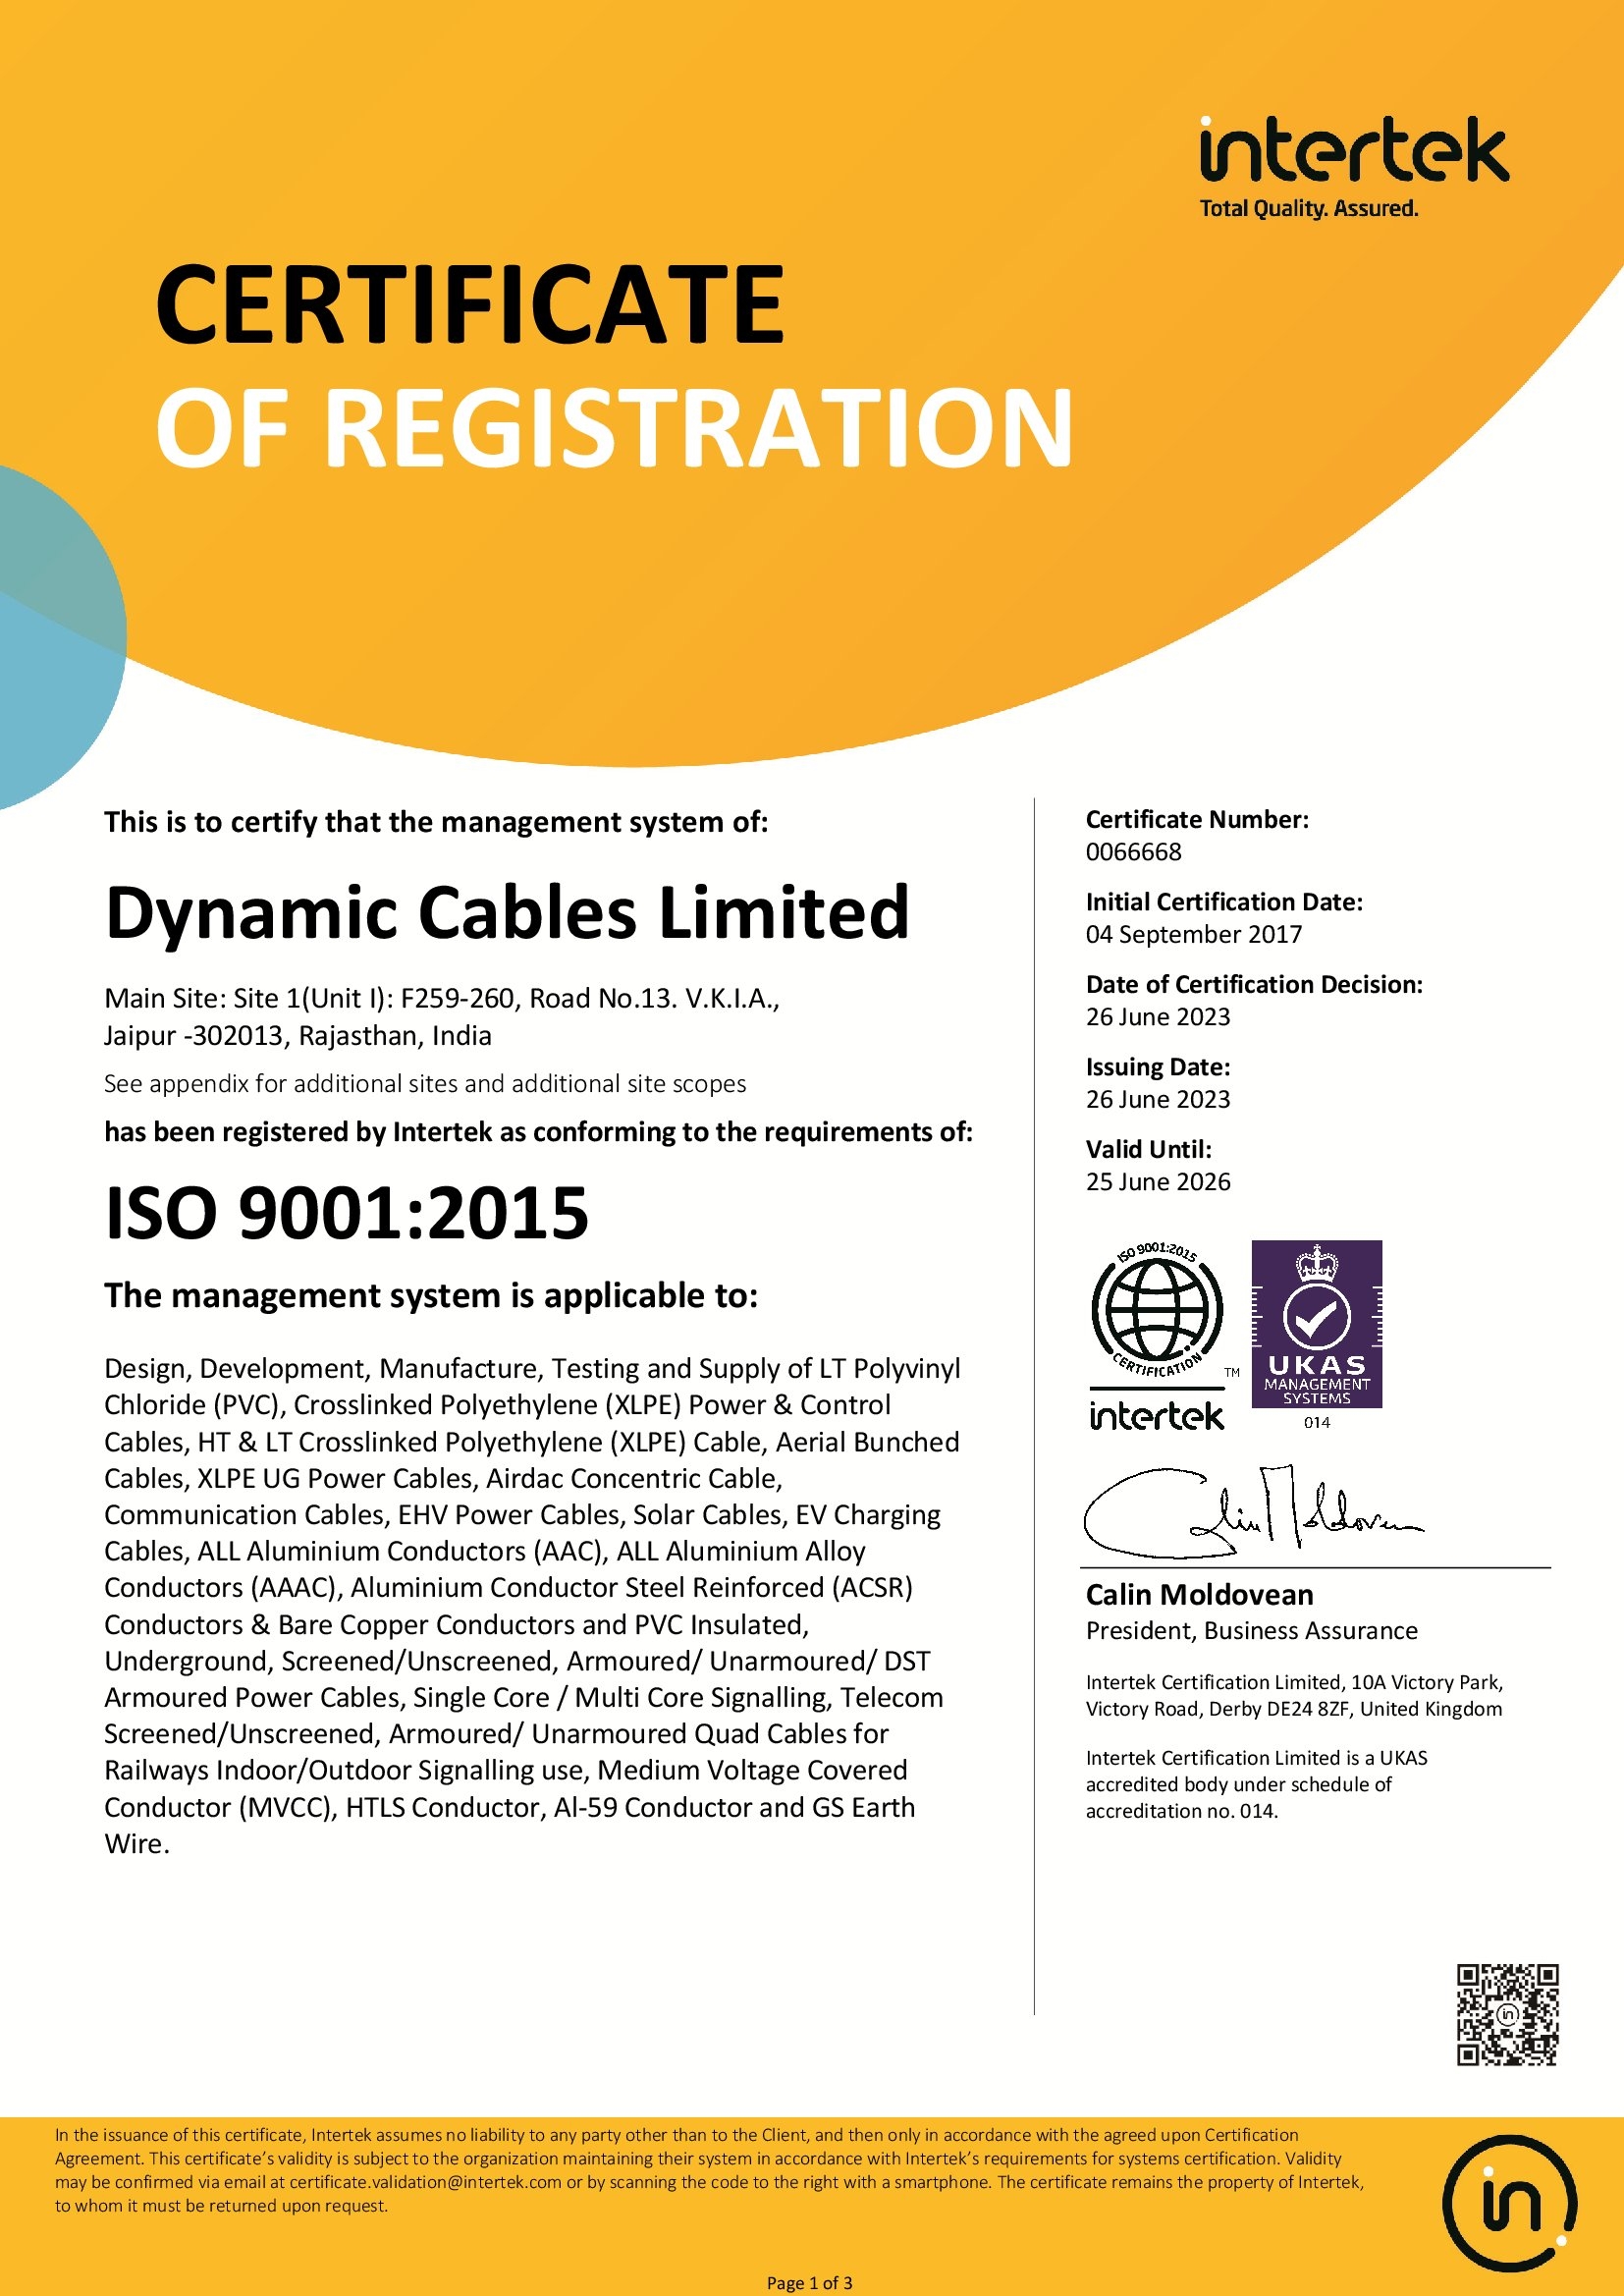 Dynamic Cable's certificate of registration